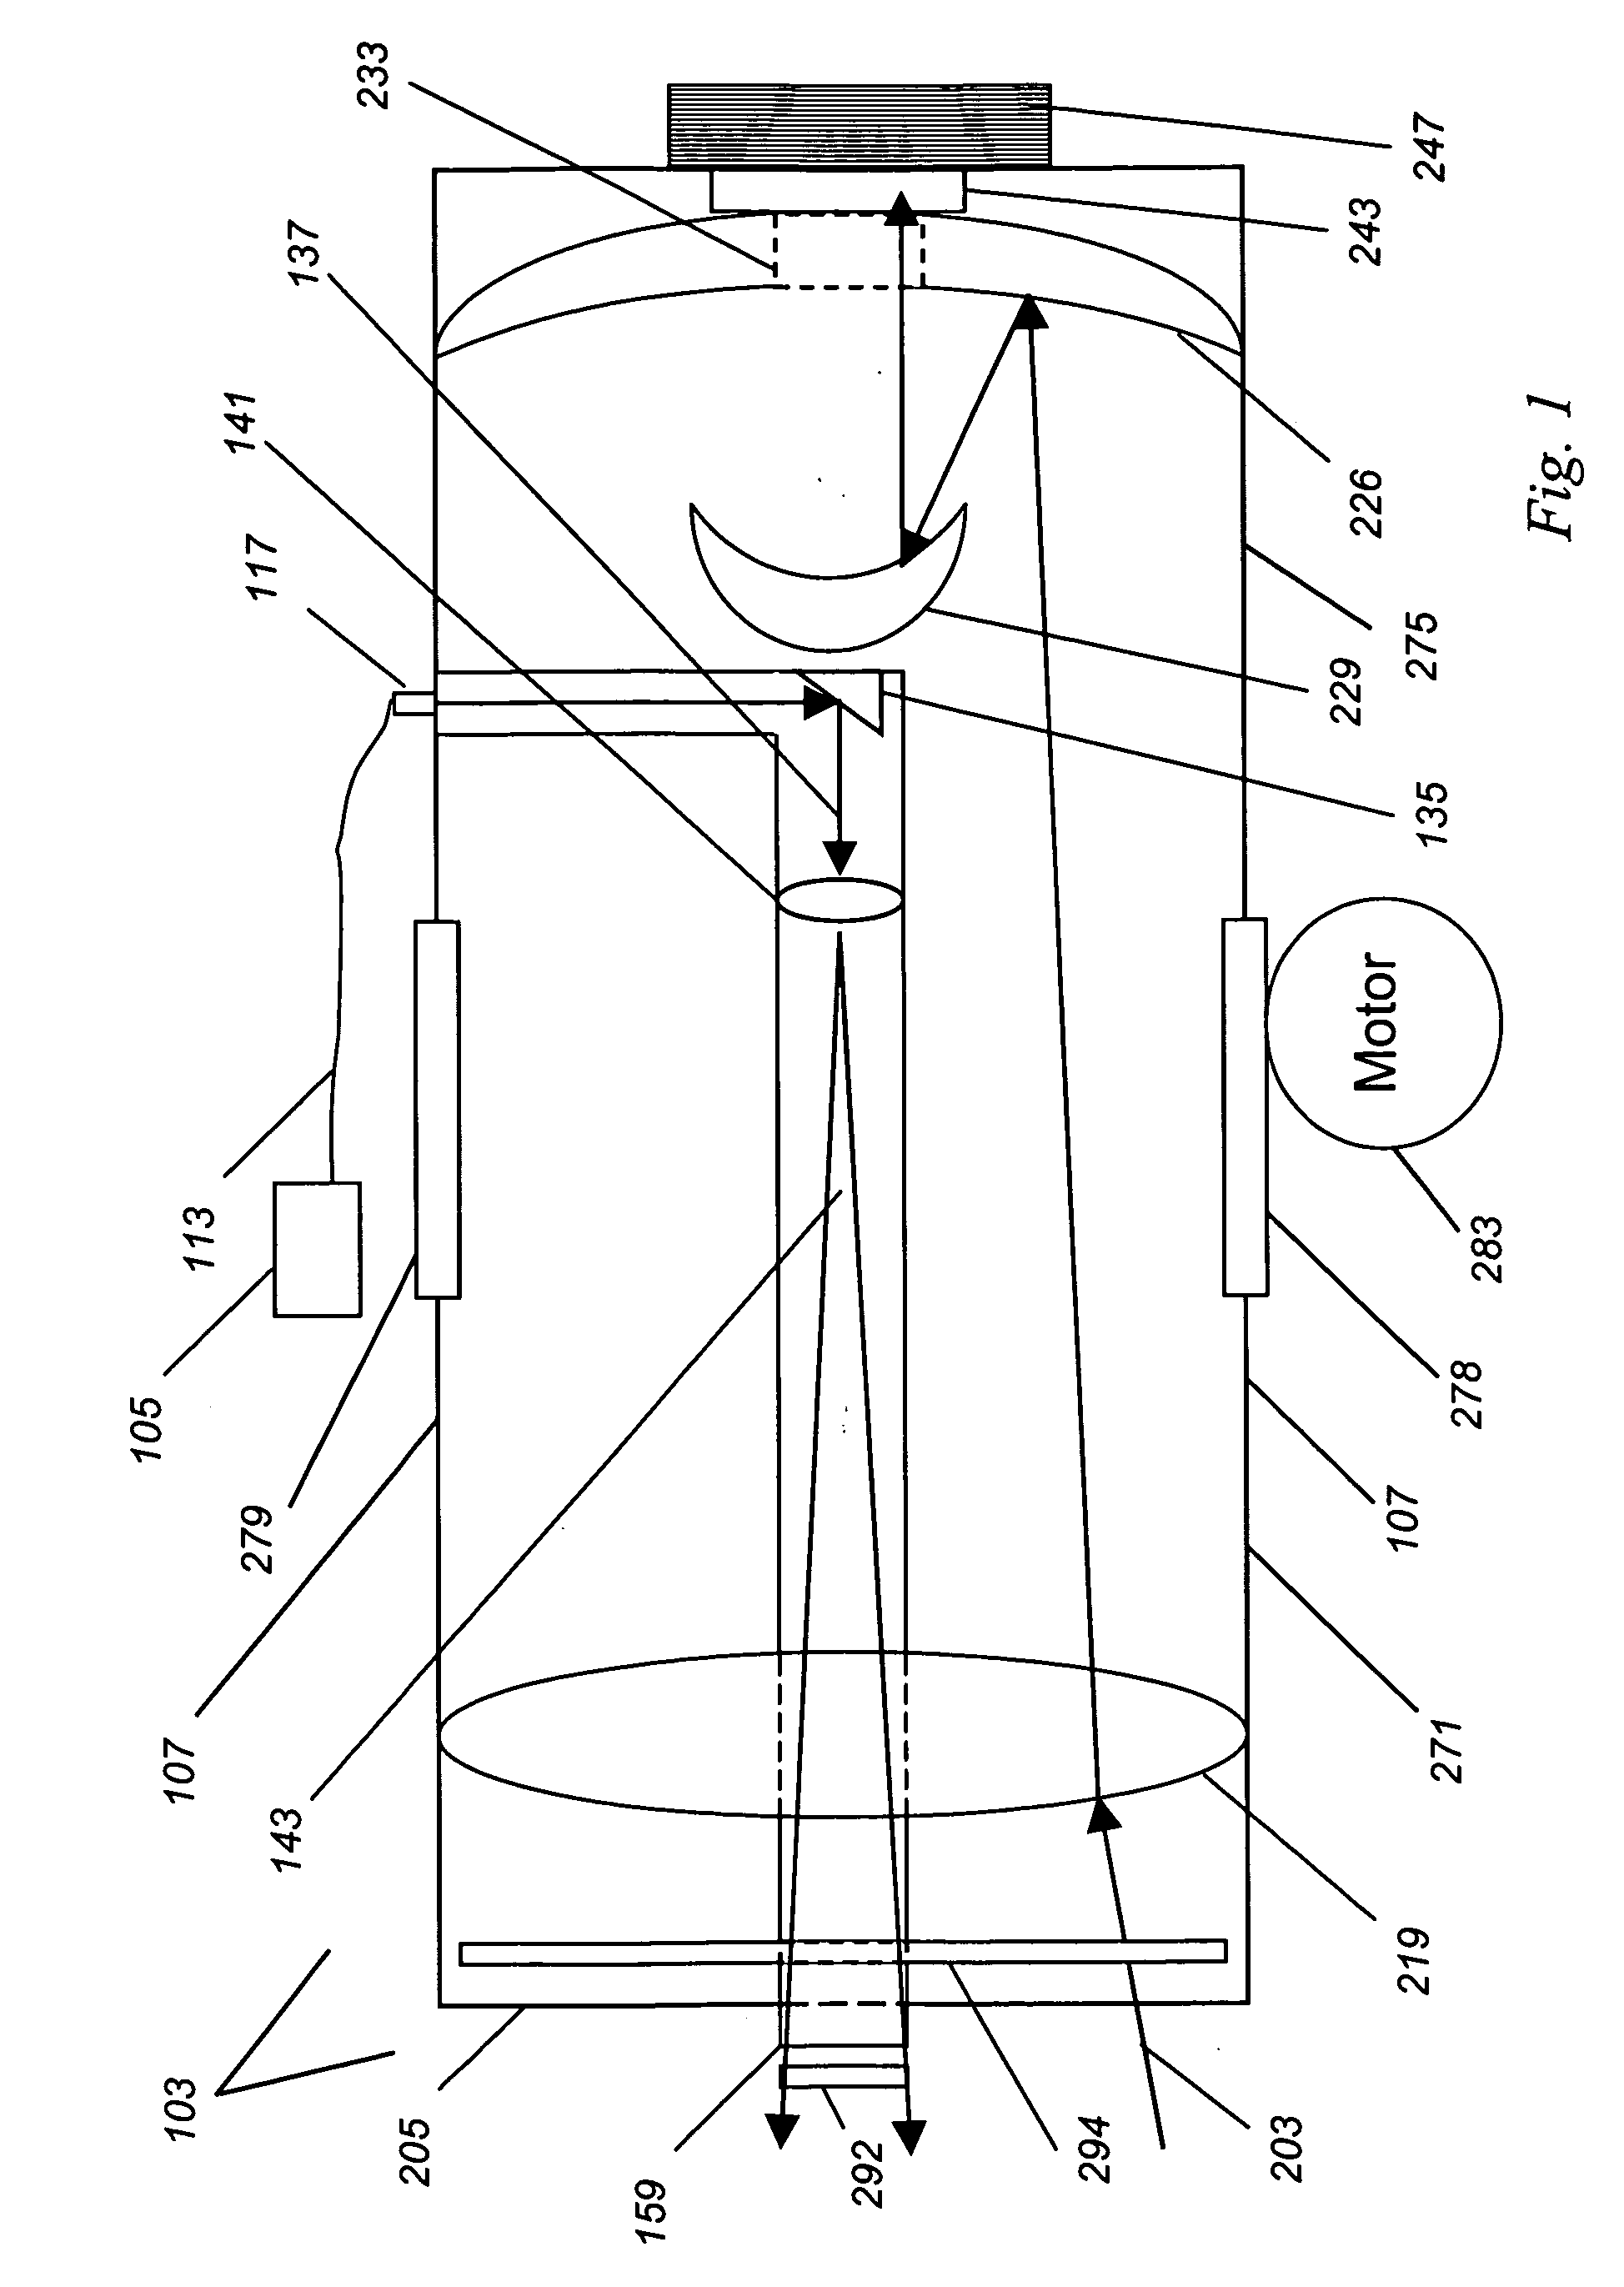 Medical imaging lens system, and method with high-efficiency light collection and collinear illumination